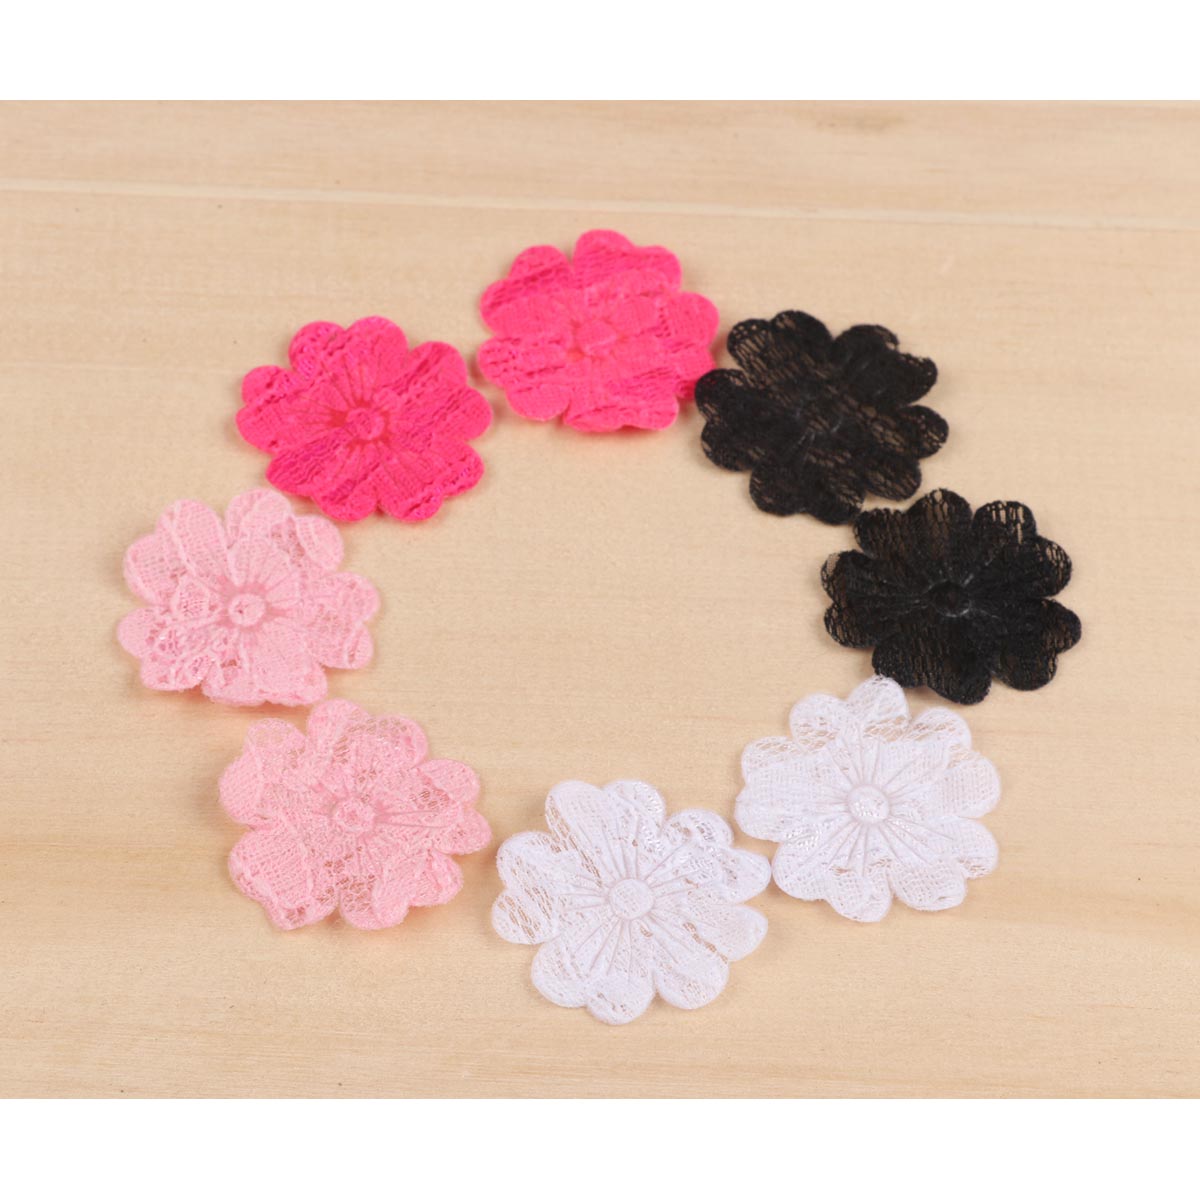 80pcs Padded Lace Daisy Flower 1.25″- 4 Colors